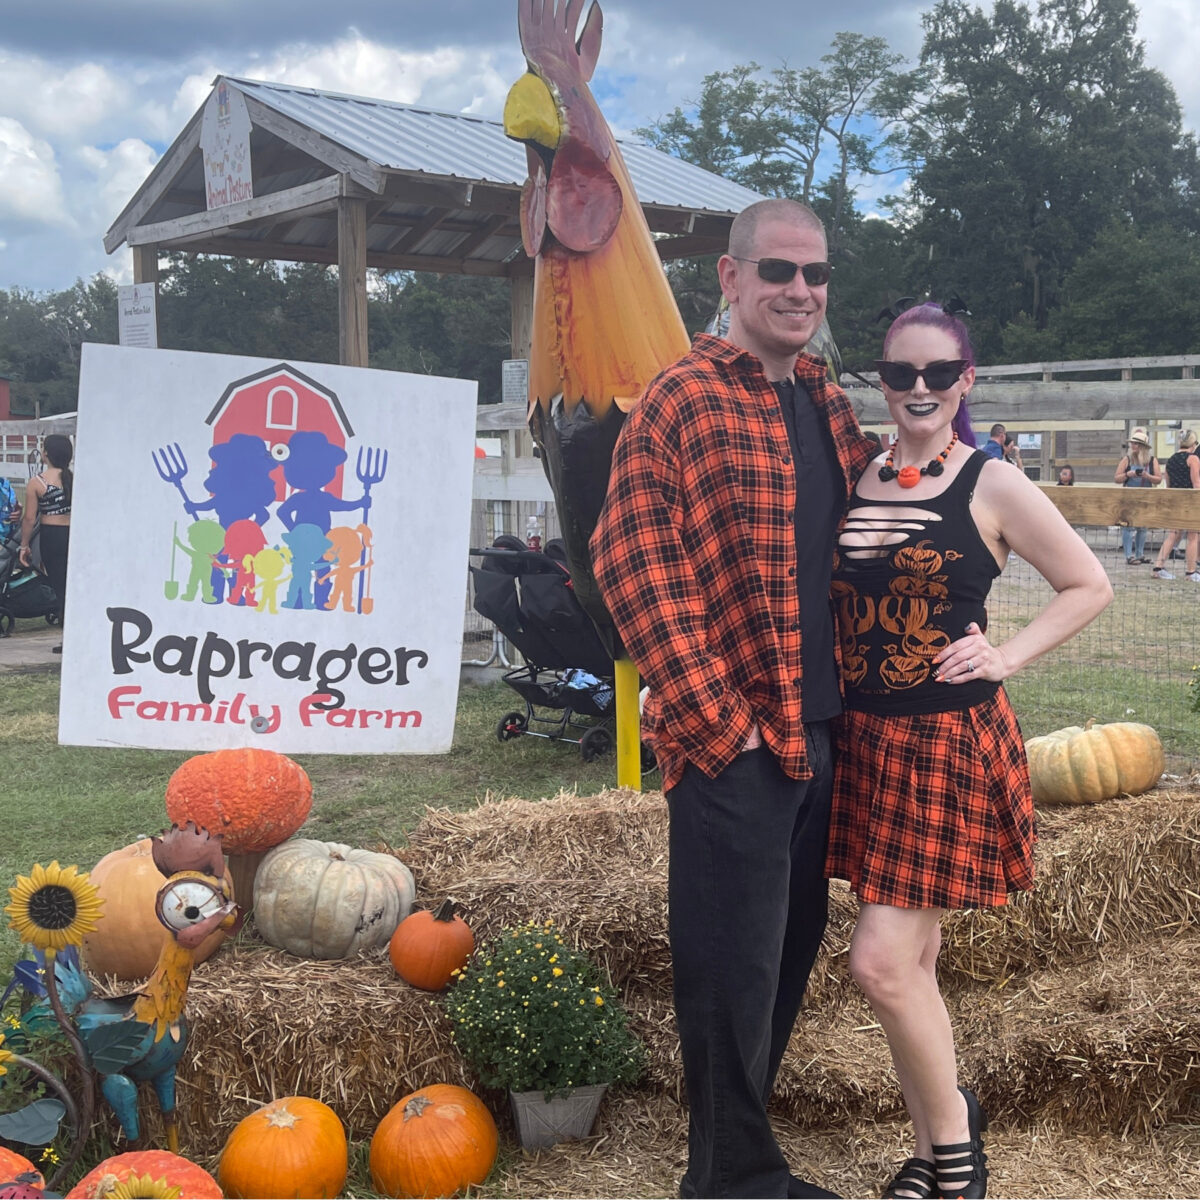 Cordelia and Dave at the Fall Pumpkin Festival wearing Foxblood flannel matching outfits